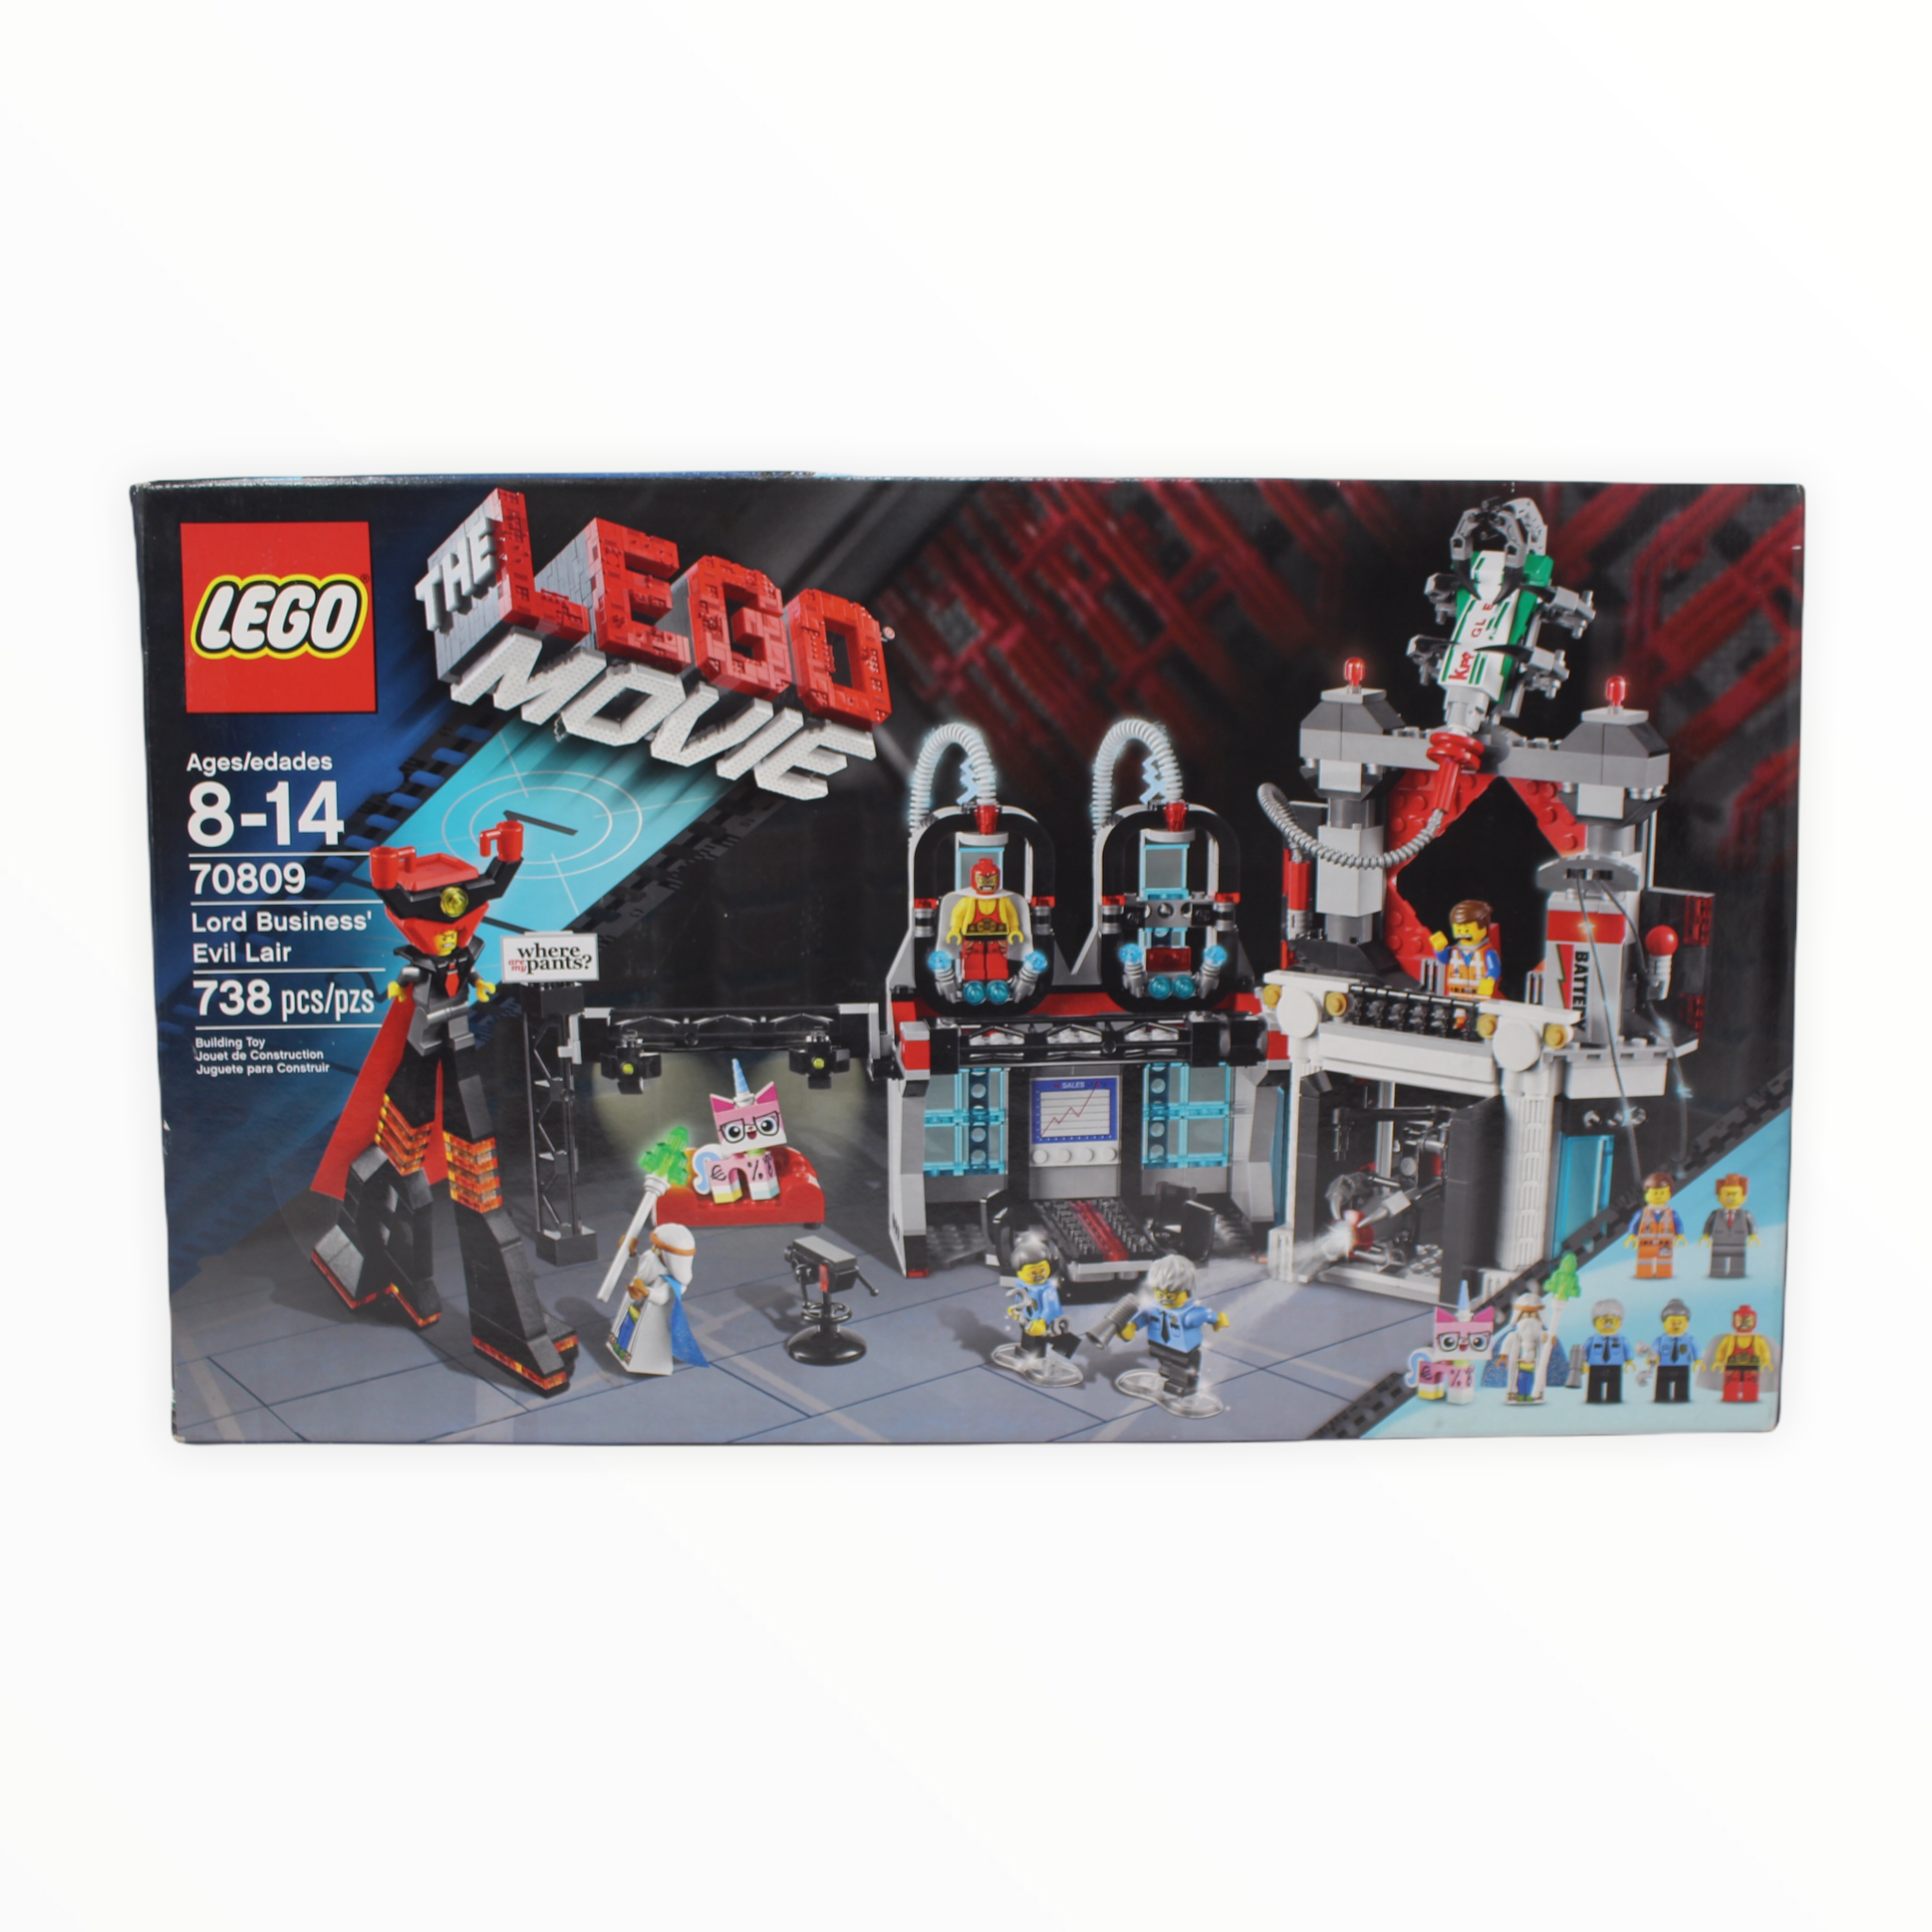 Retired Set 70809 The LEGO Movie Lord Business’ Evil Lair